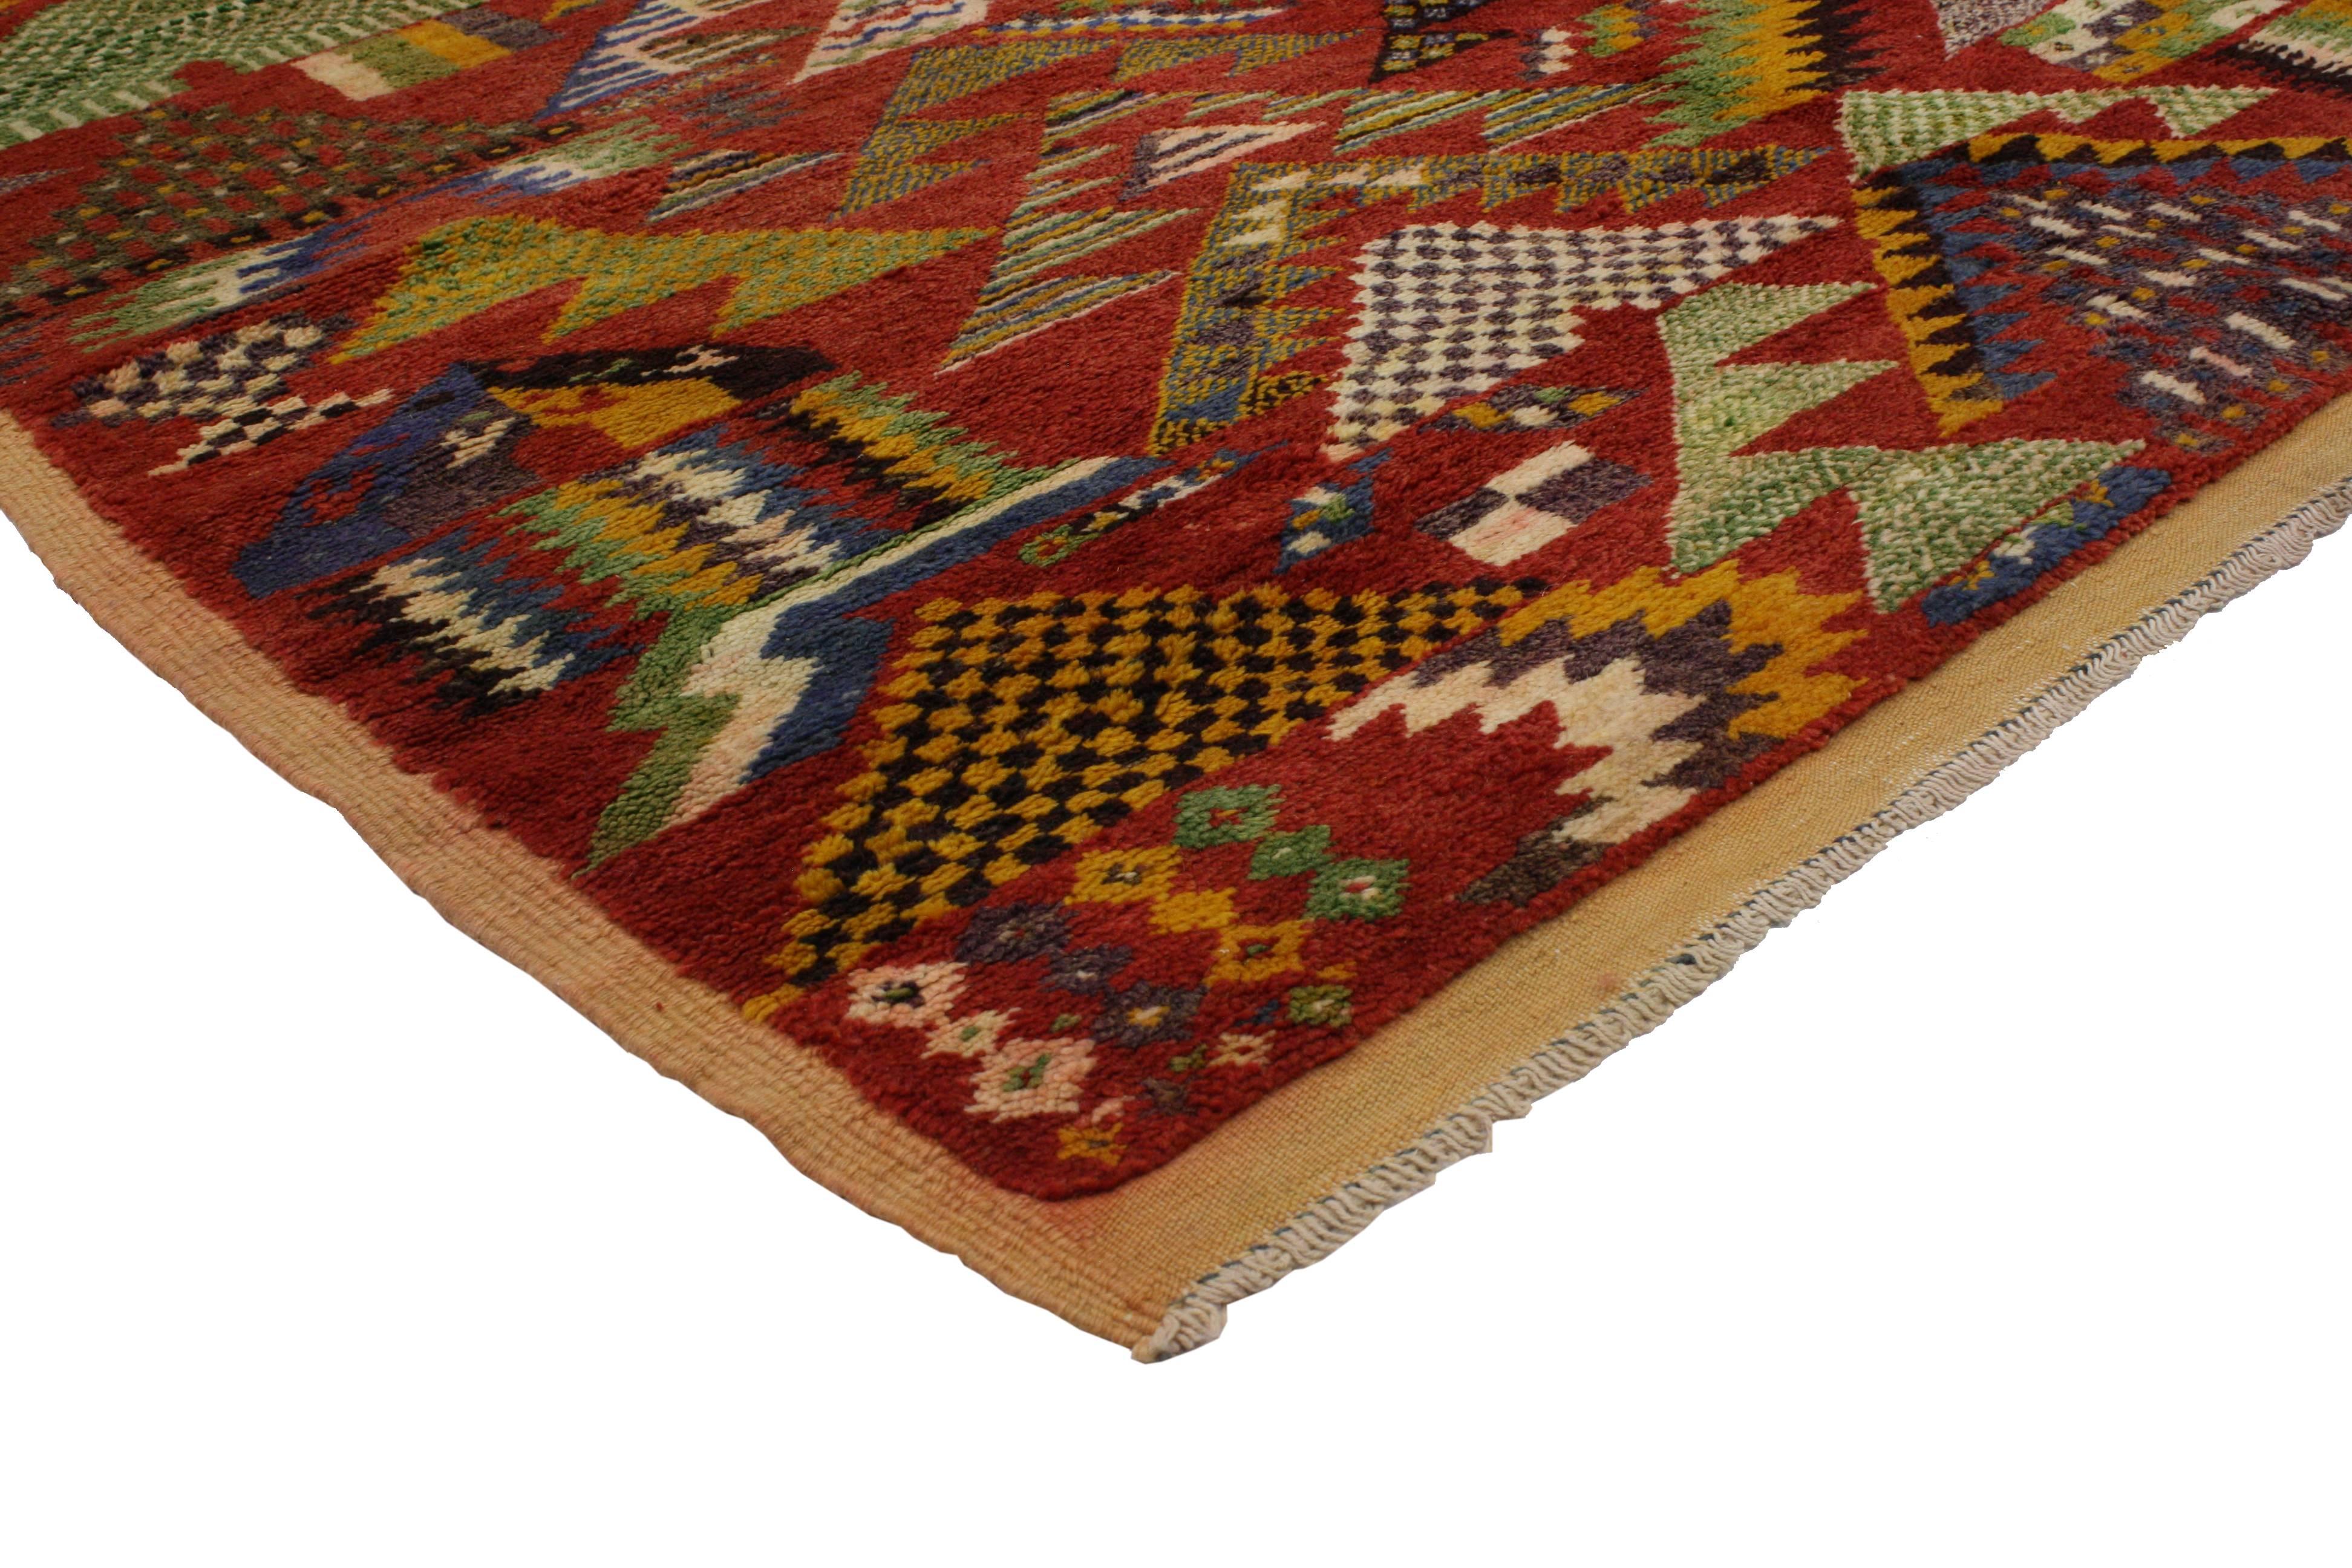 Moroccan rugs are known for their dynamic colorful designs and for their strong sense of geometric structure. Adding a unique flair to timeless tribal design, this unique Moroccan rug will create a truly tempting look for nearly any interior space.